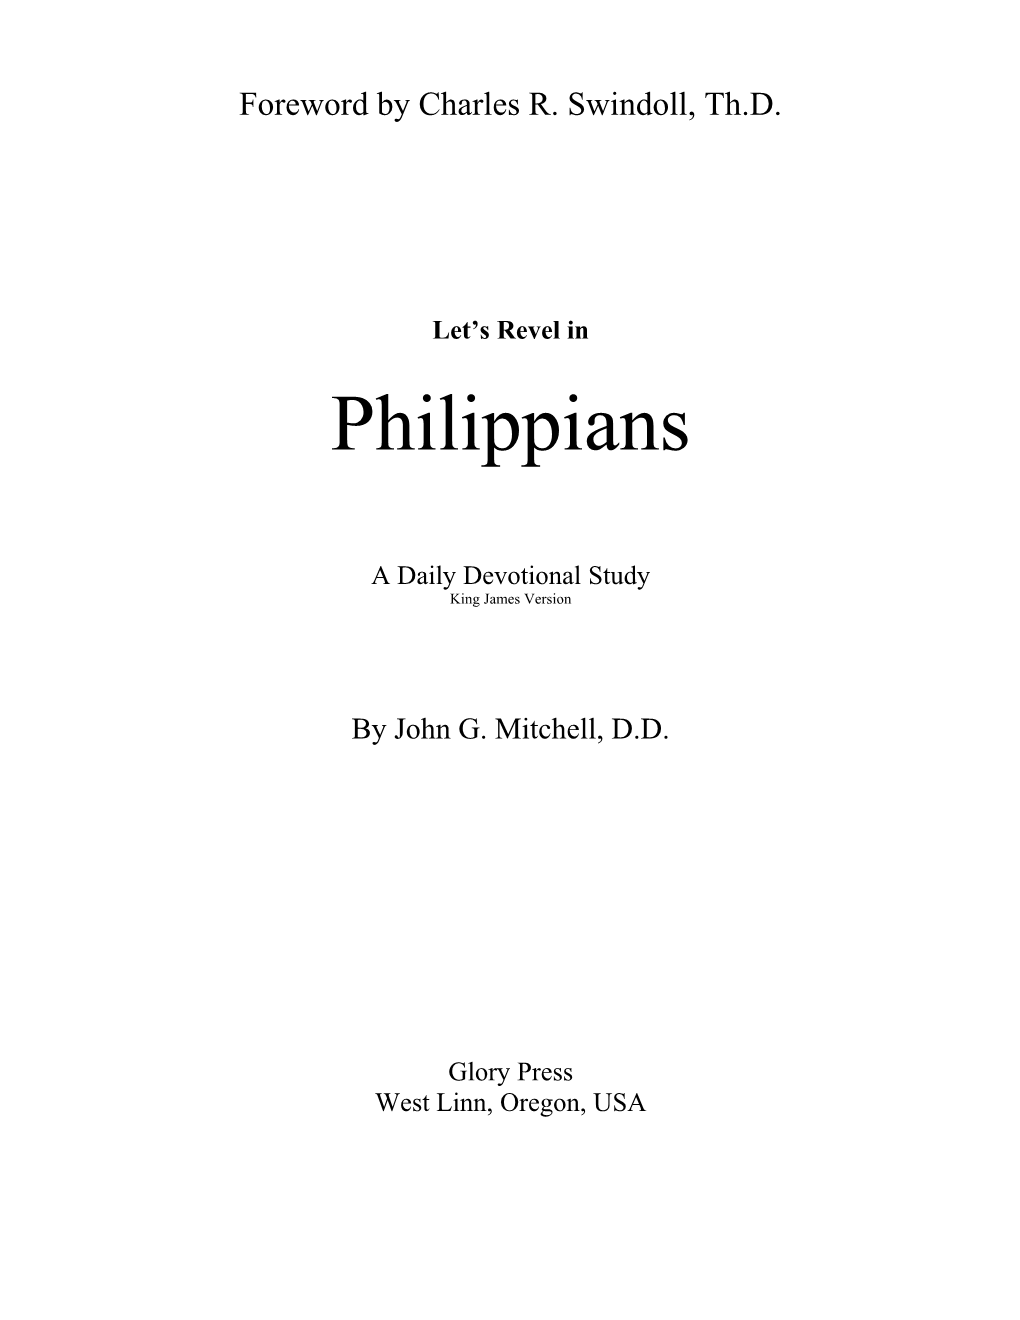 LET S REVEL in PHILIPPIANS by Dr. John G. Mitchell1